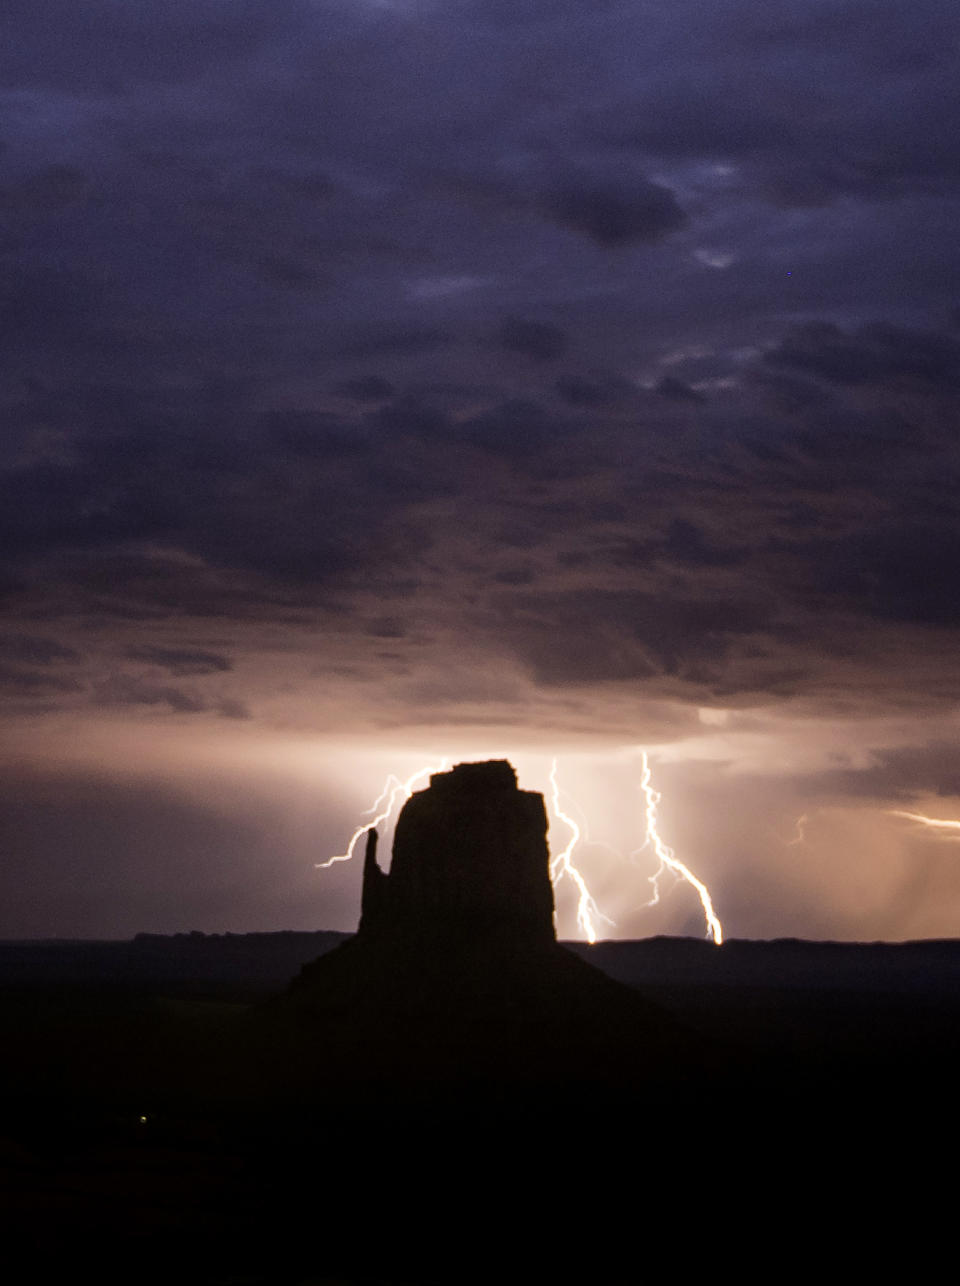 Stunning images capture the moment lightning strikes over Monument Valley